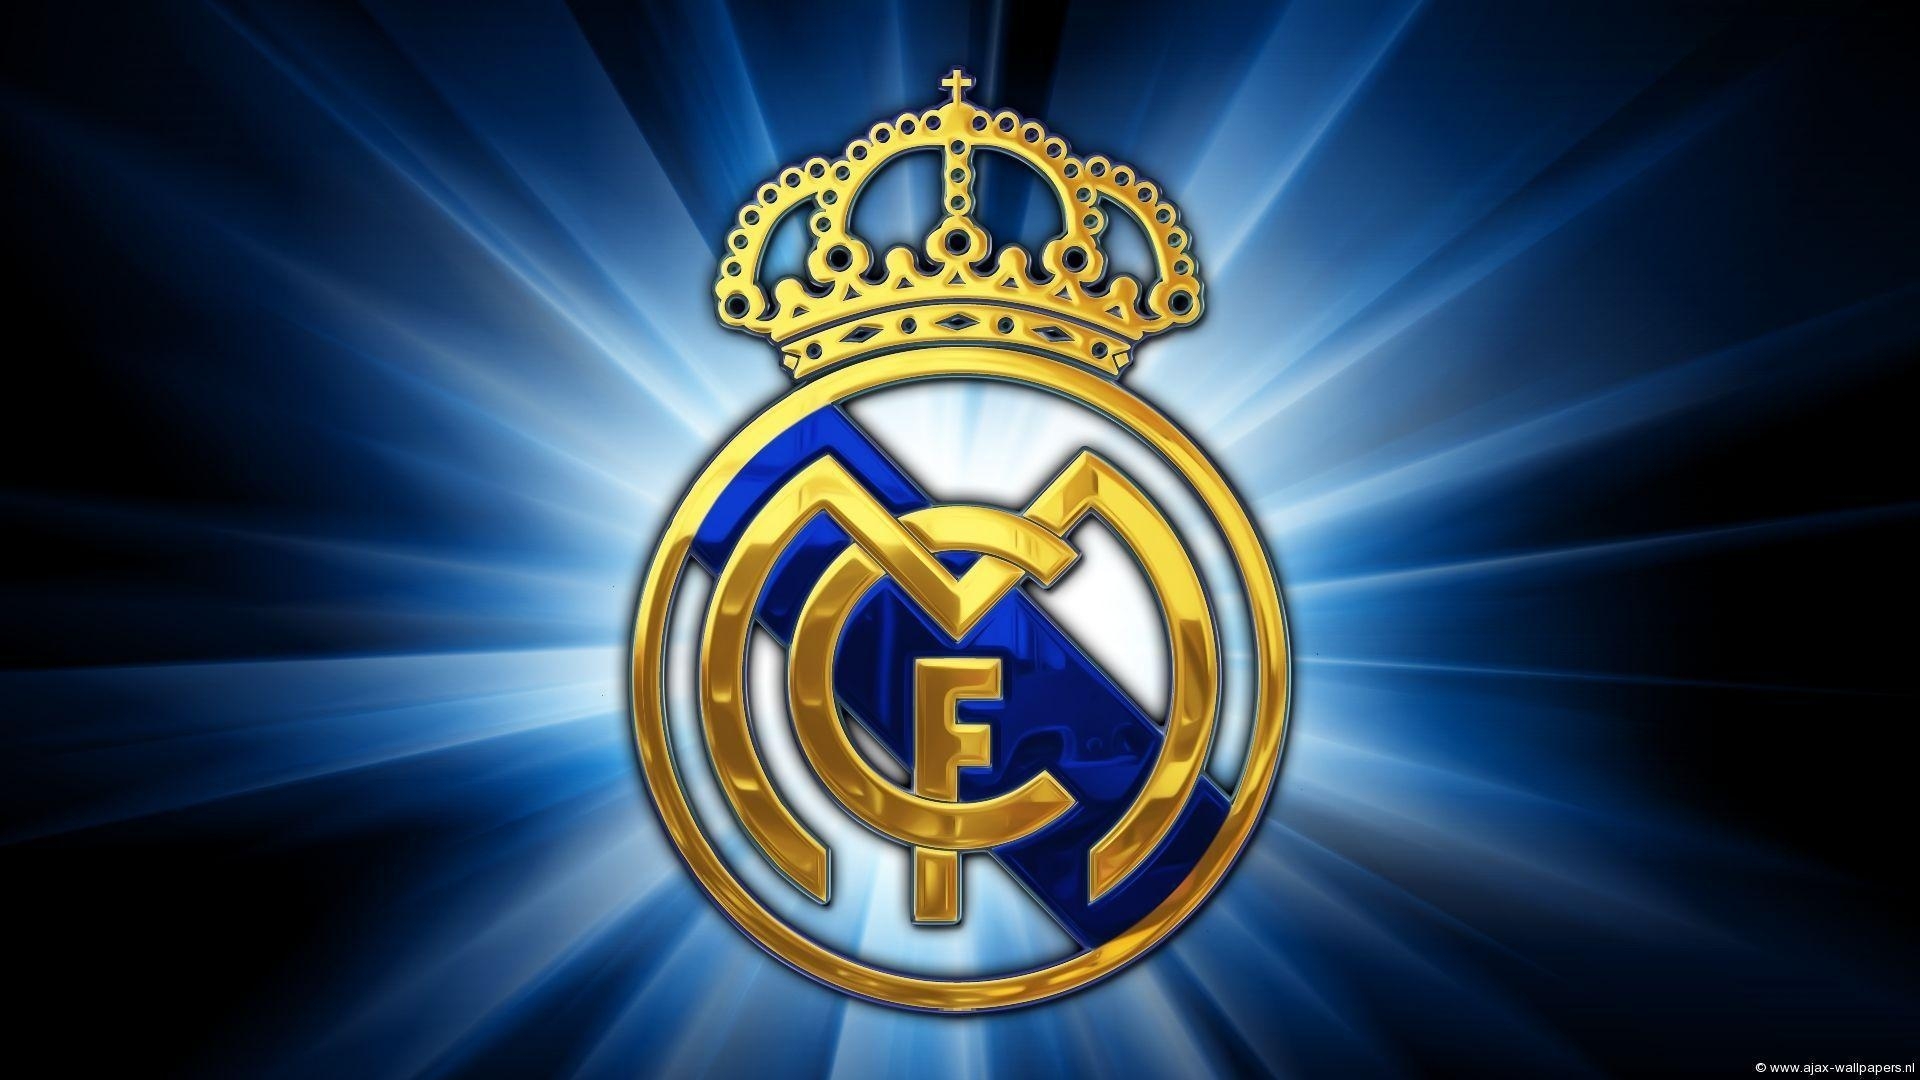 10 Top Real Madrid Logo Wallpaper FULL HD 1920×1080 For PC Background